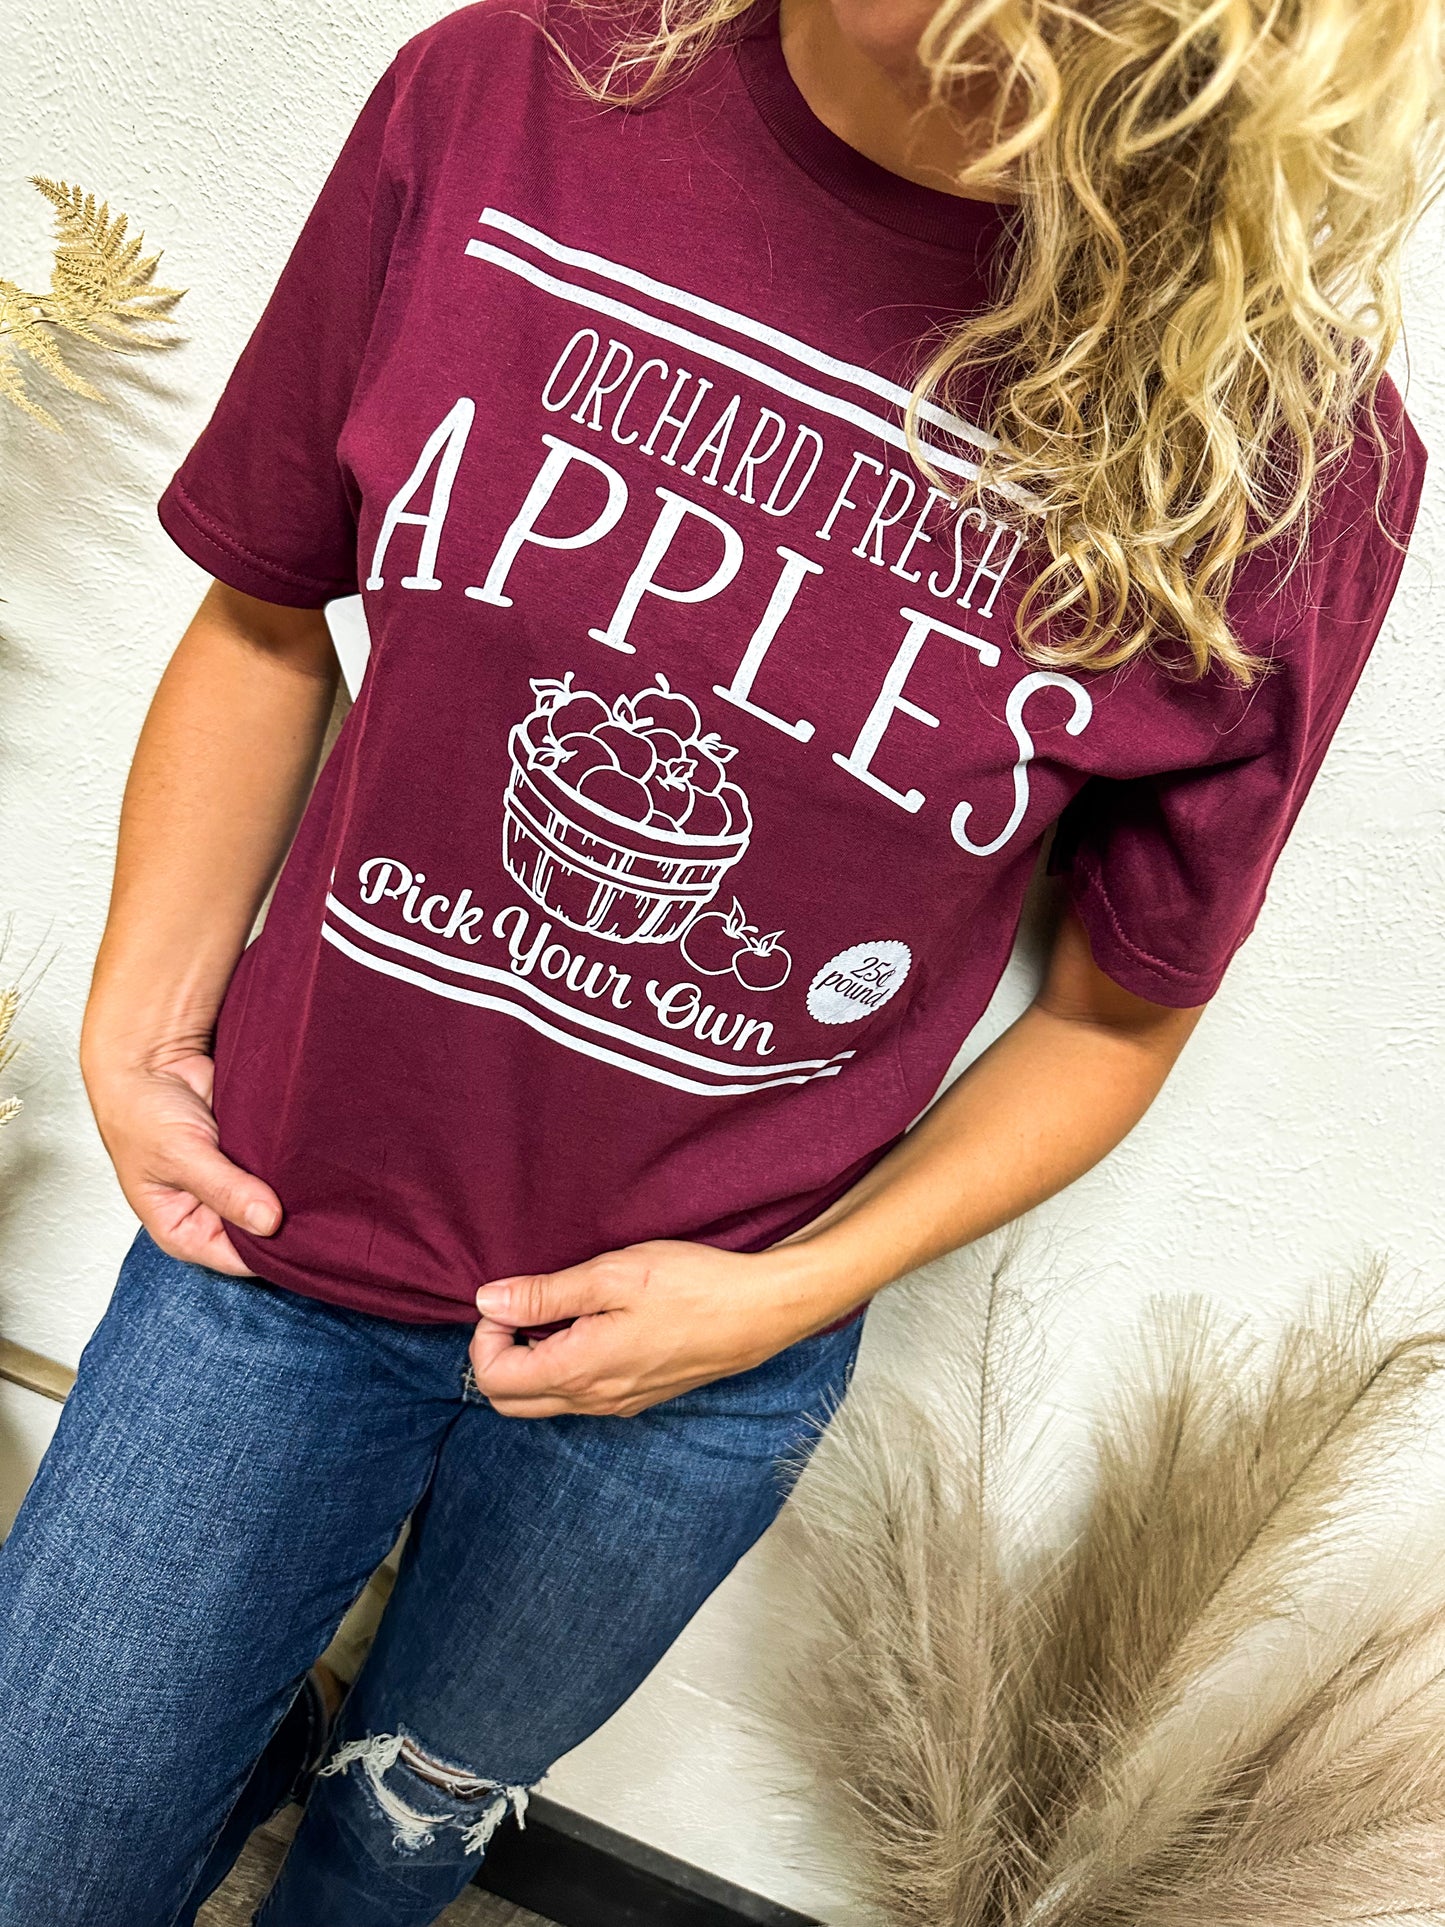 Orchard Fresh Apples Graphic Tee